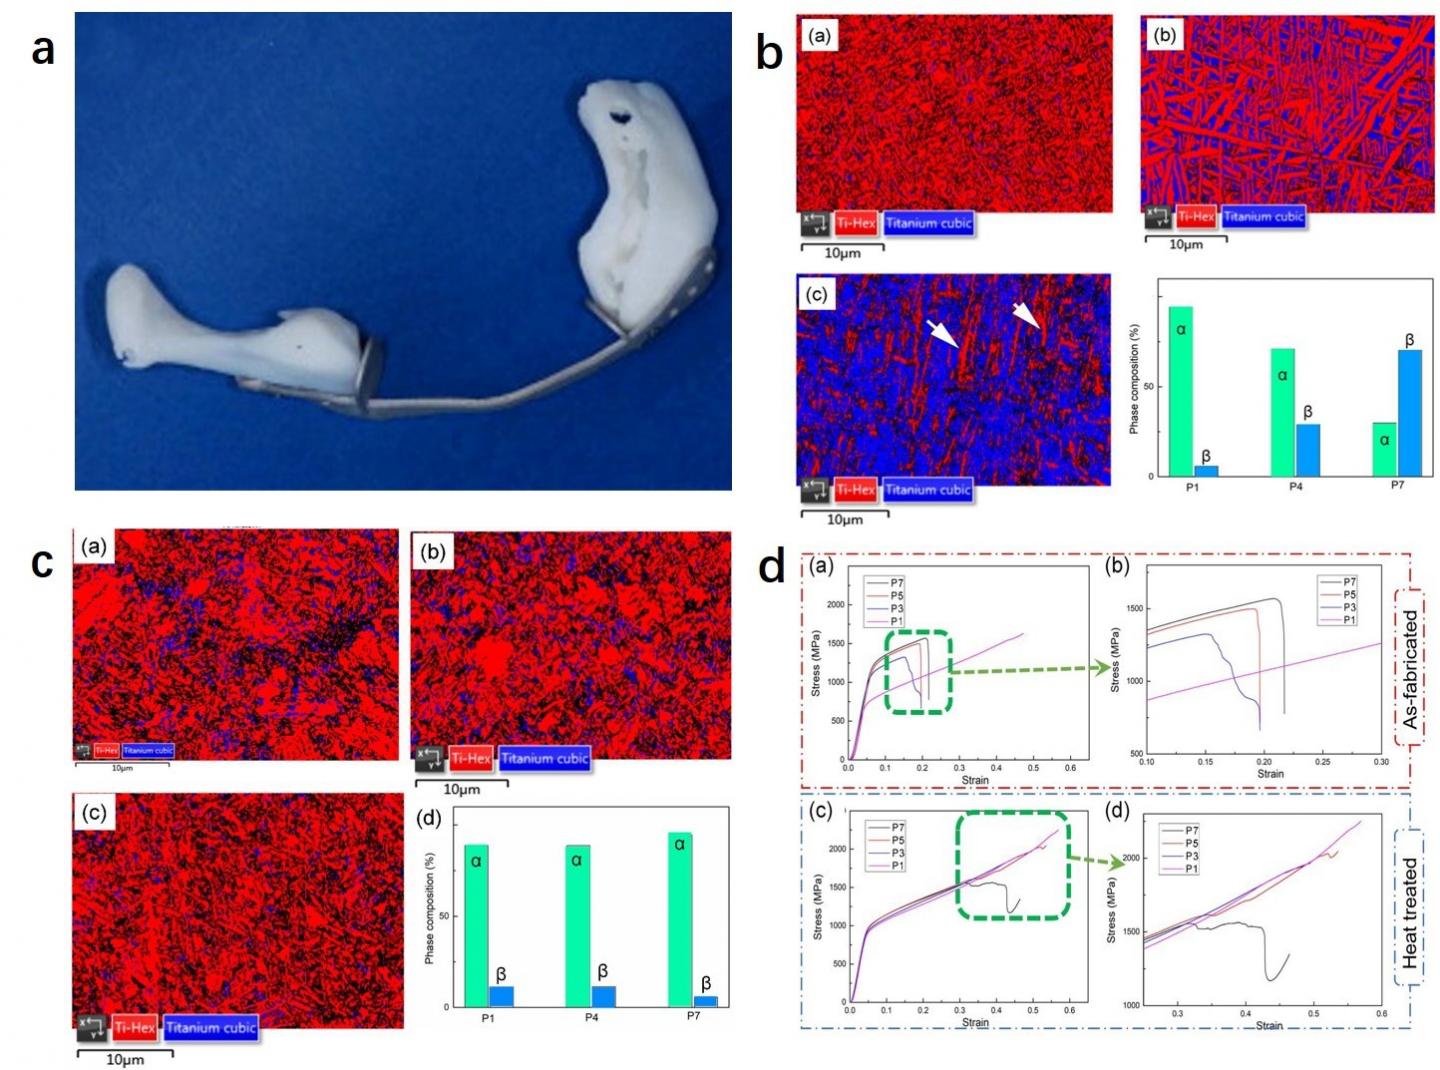 Figure |controlling of microstructure and performance of human implants.